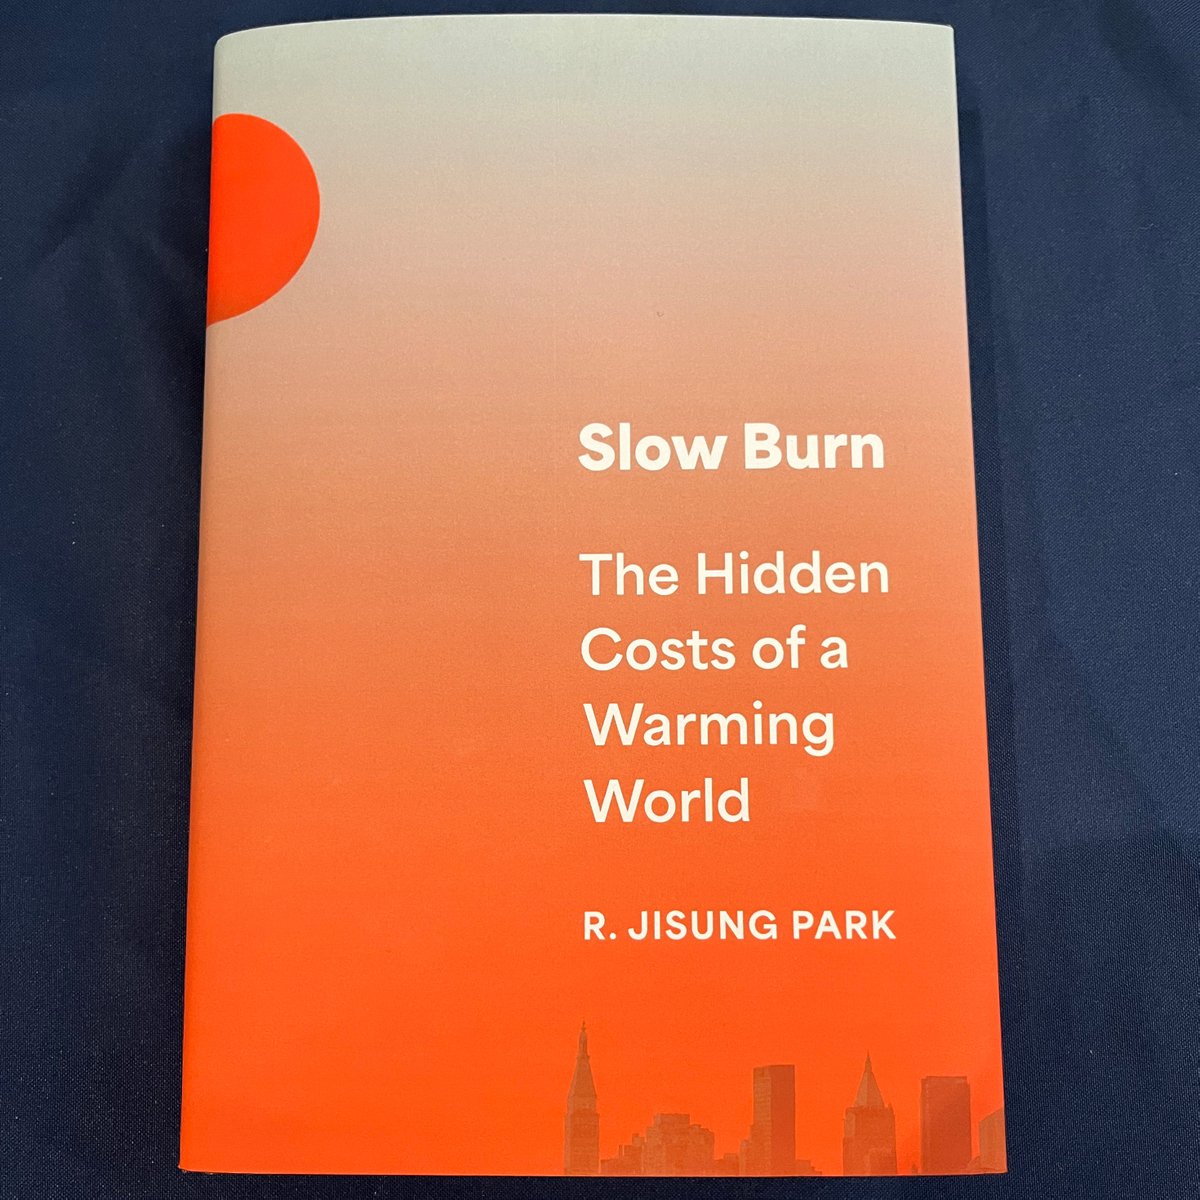 “The warming earth is causing real problems today, and I think we’ve been seriously underestimating those costs.” #PennSP2’s @rjisungpark speaks with @PennGazette about his new book from @PrincetonUPress: thepenngazette.com/slow-burn/